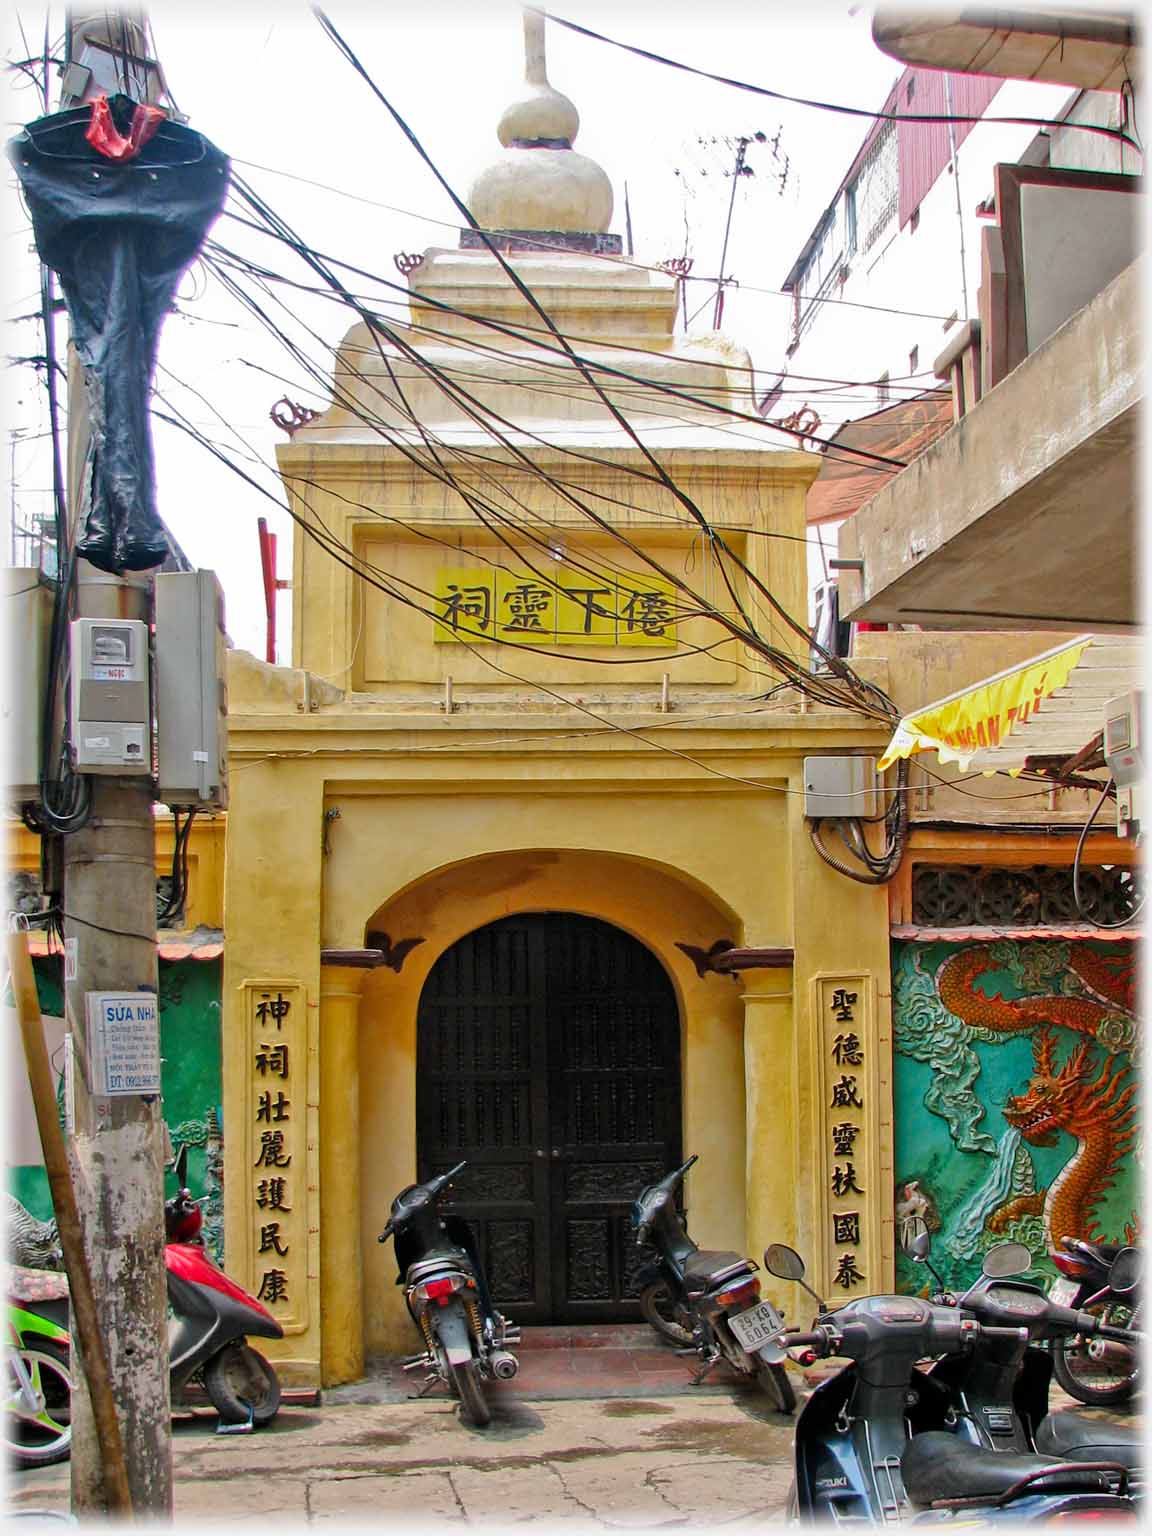 Pagoda entrance with Chinese characters.